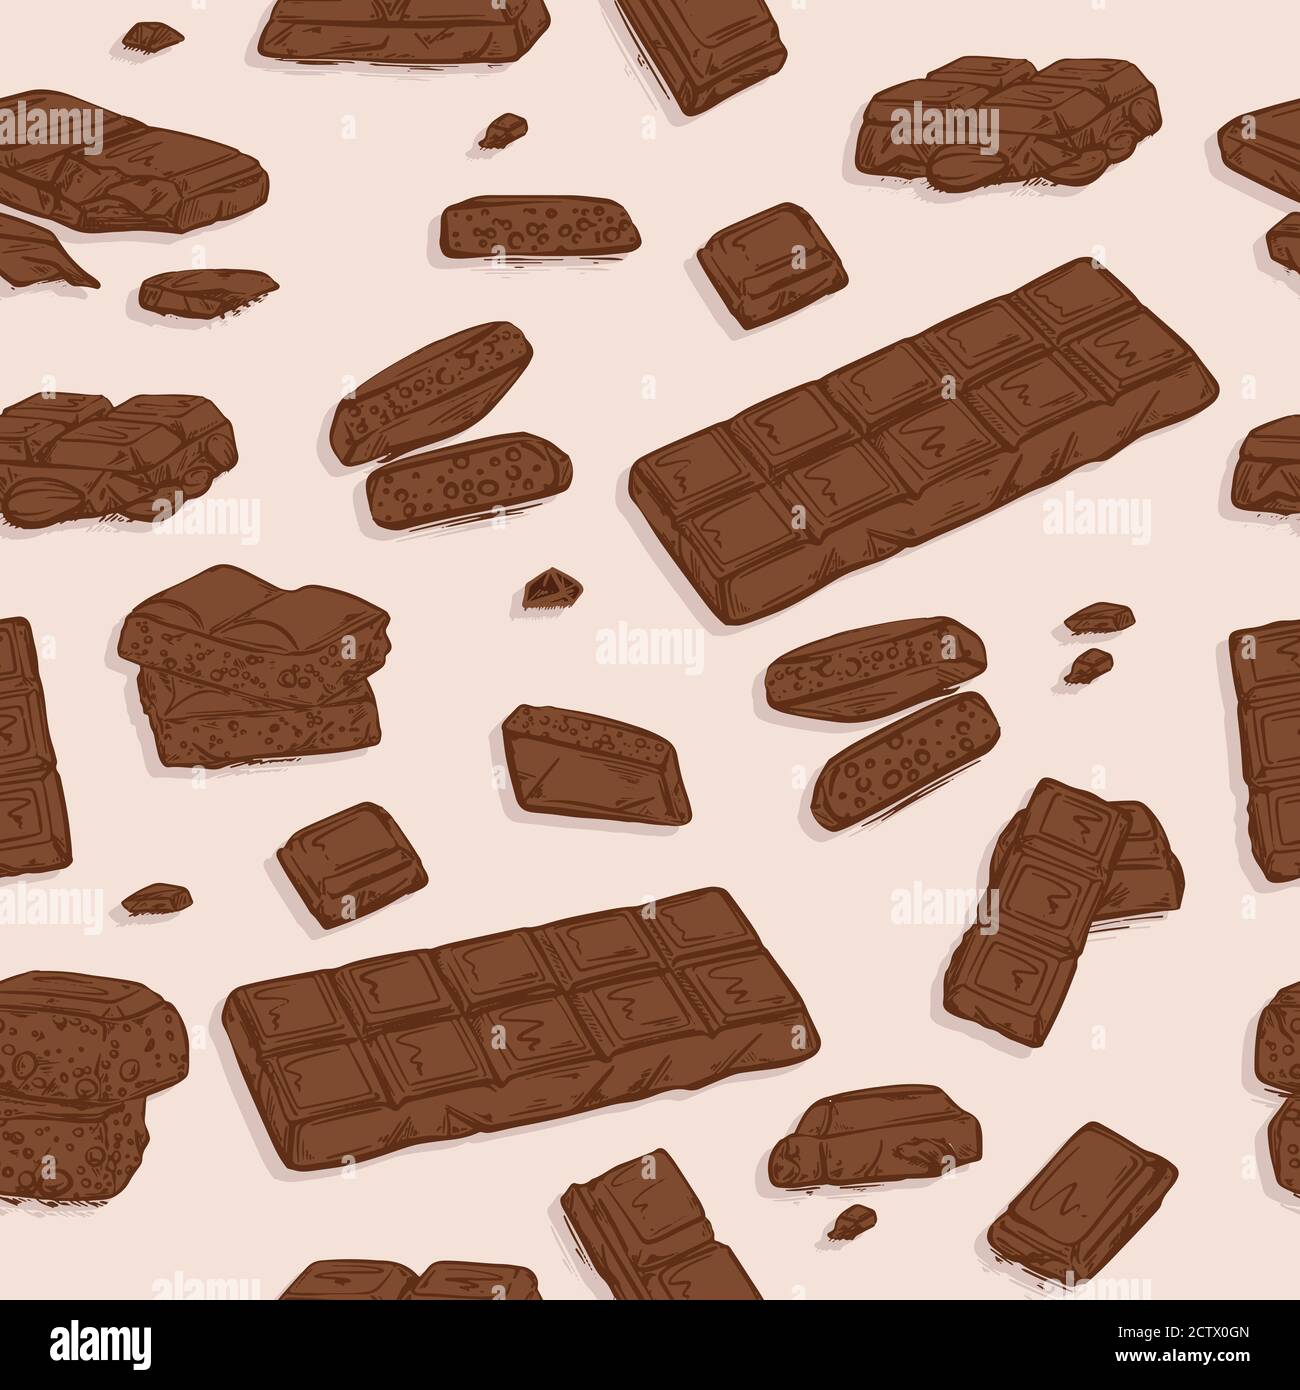 15,272 Strawberry Chocolate Sketch Images, Stock Photos, 3D objects, &  Vectors | Shutterstock